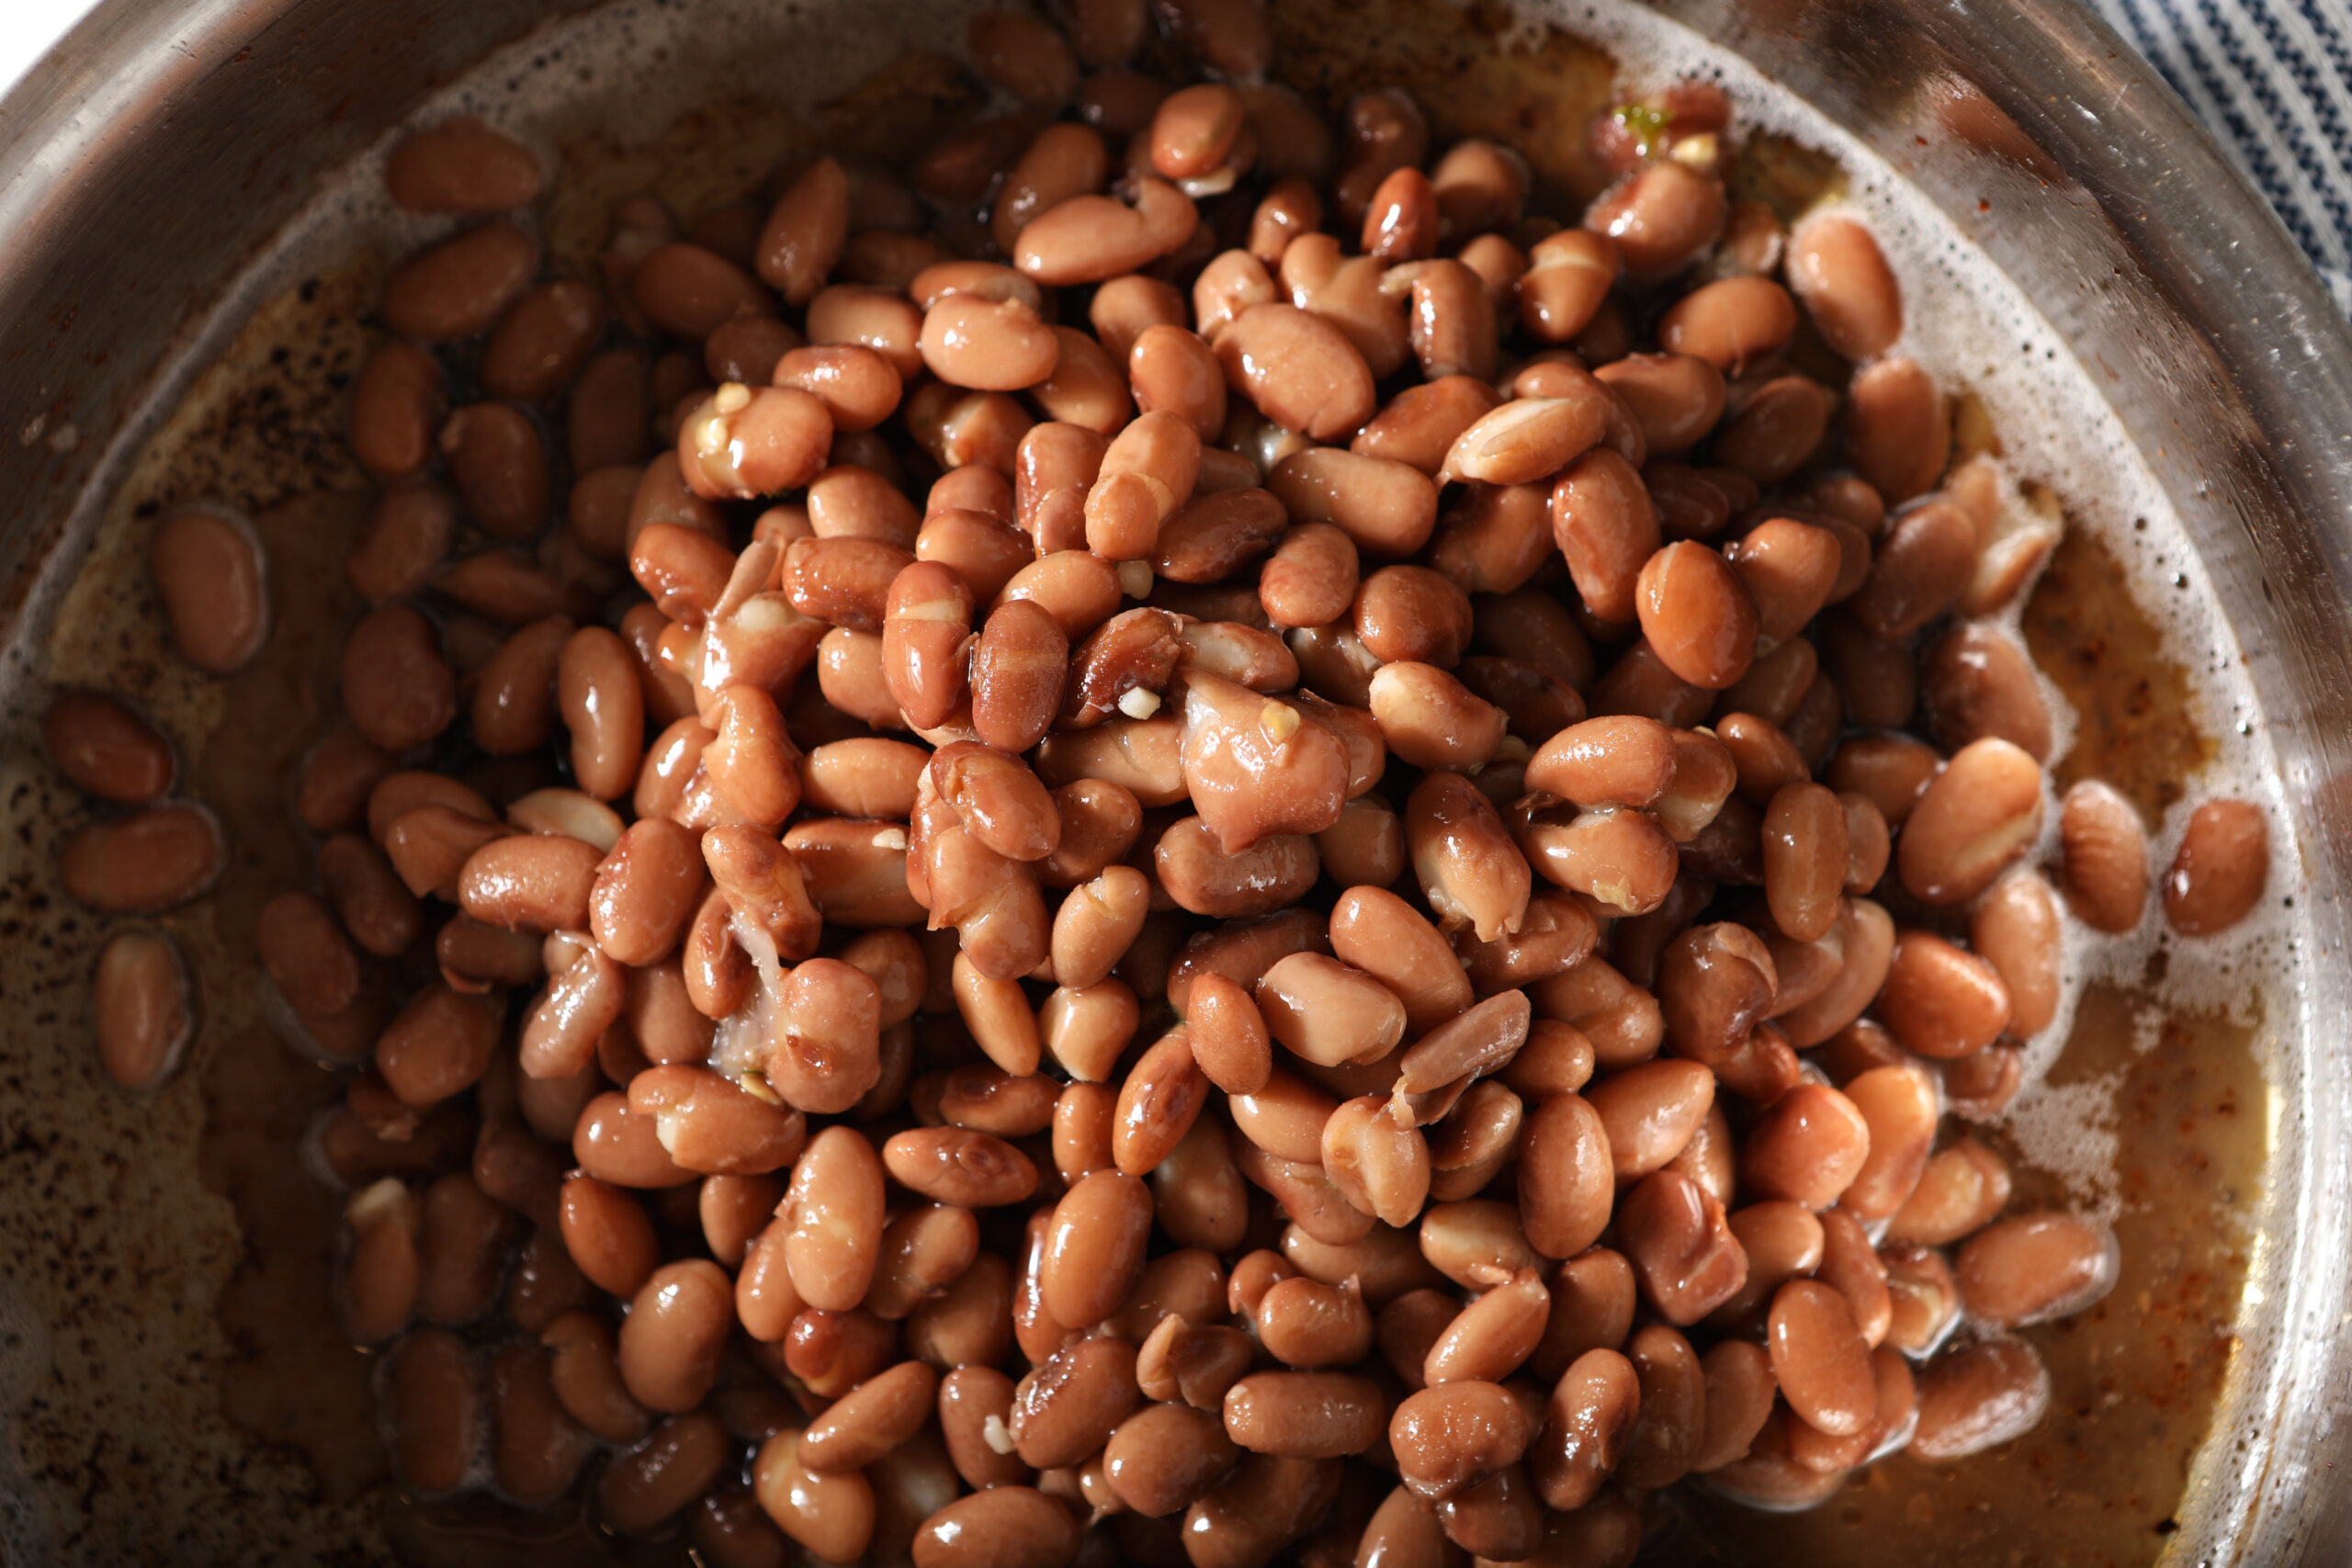 Pinto beans in skillet with bacon grease.